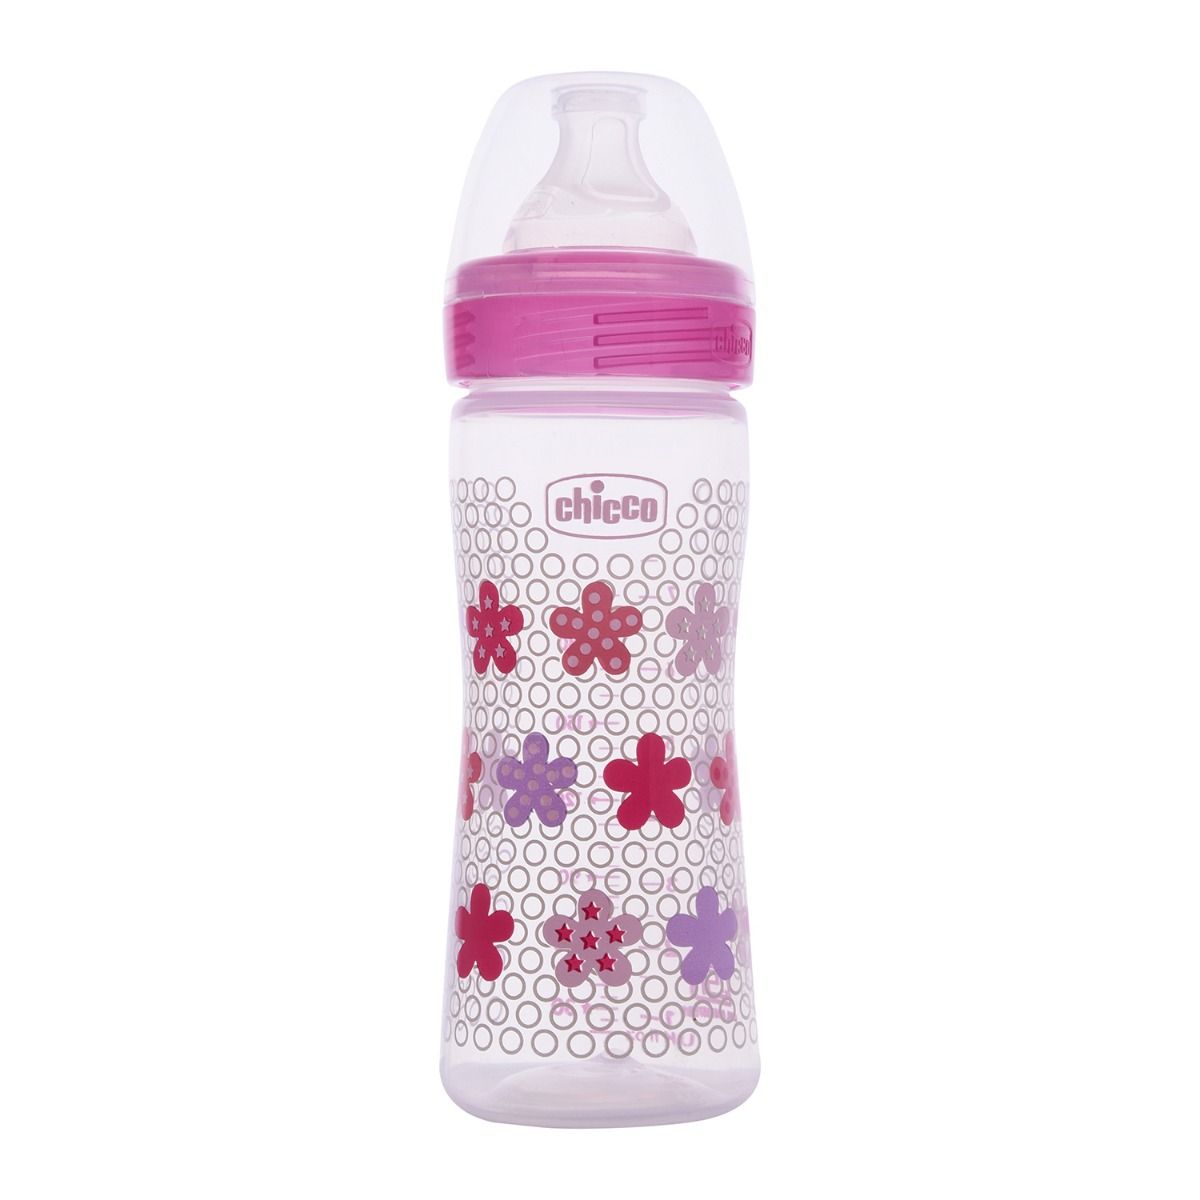 Chicco Well-Being Pink Feeding Bottle, 250 ml, Pack of 1 